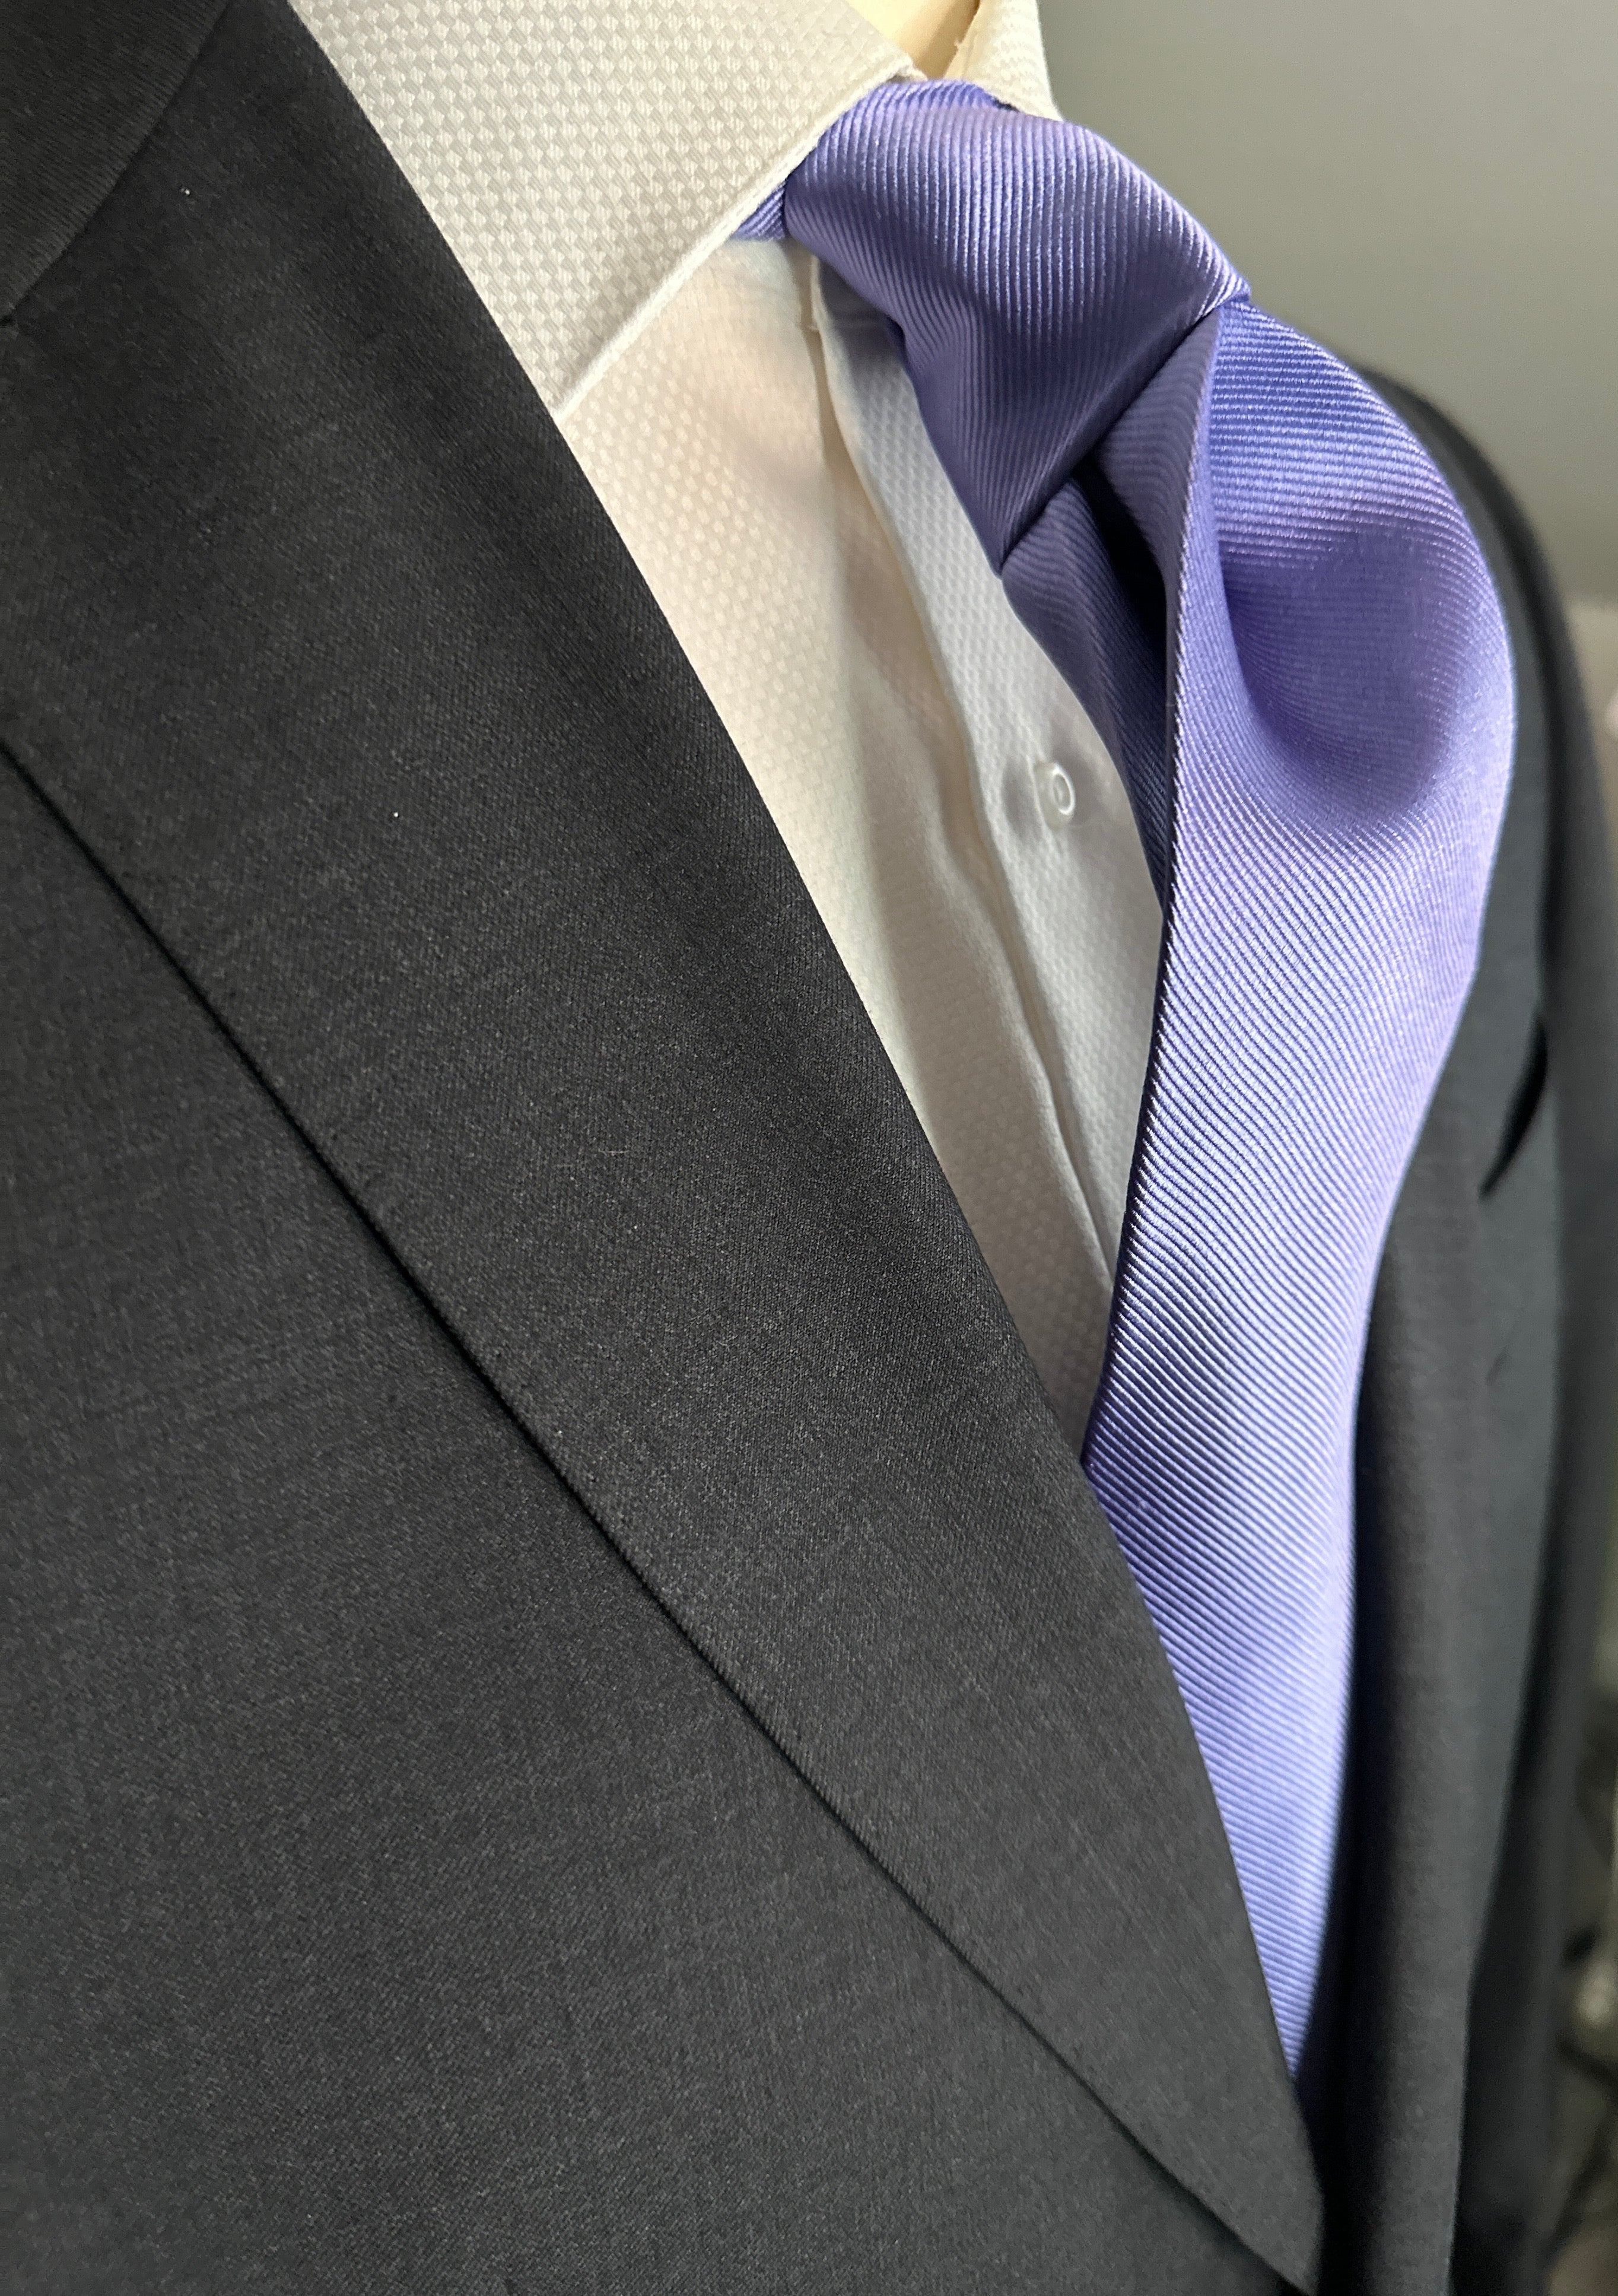 SUITCAFE Silk Tie Lavender Solid Twill Woven